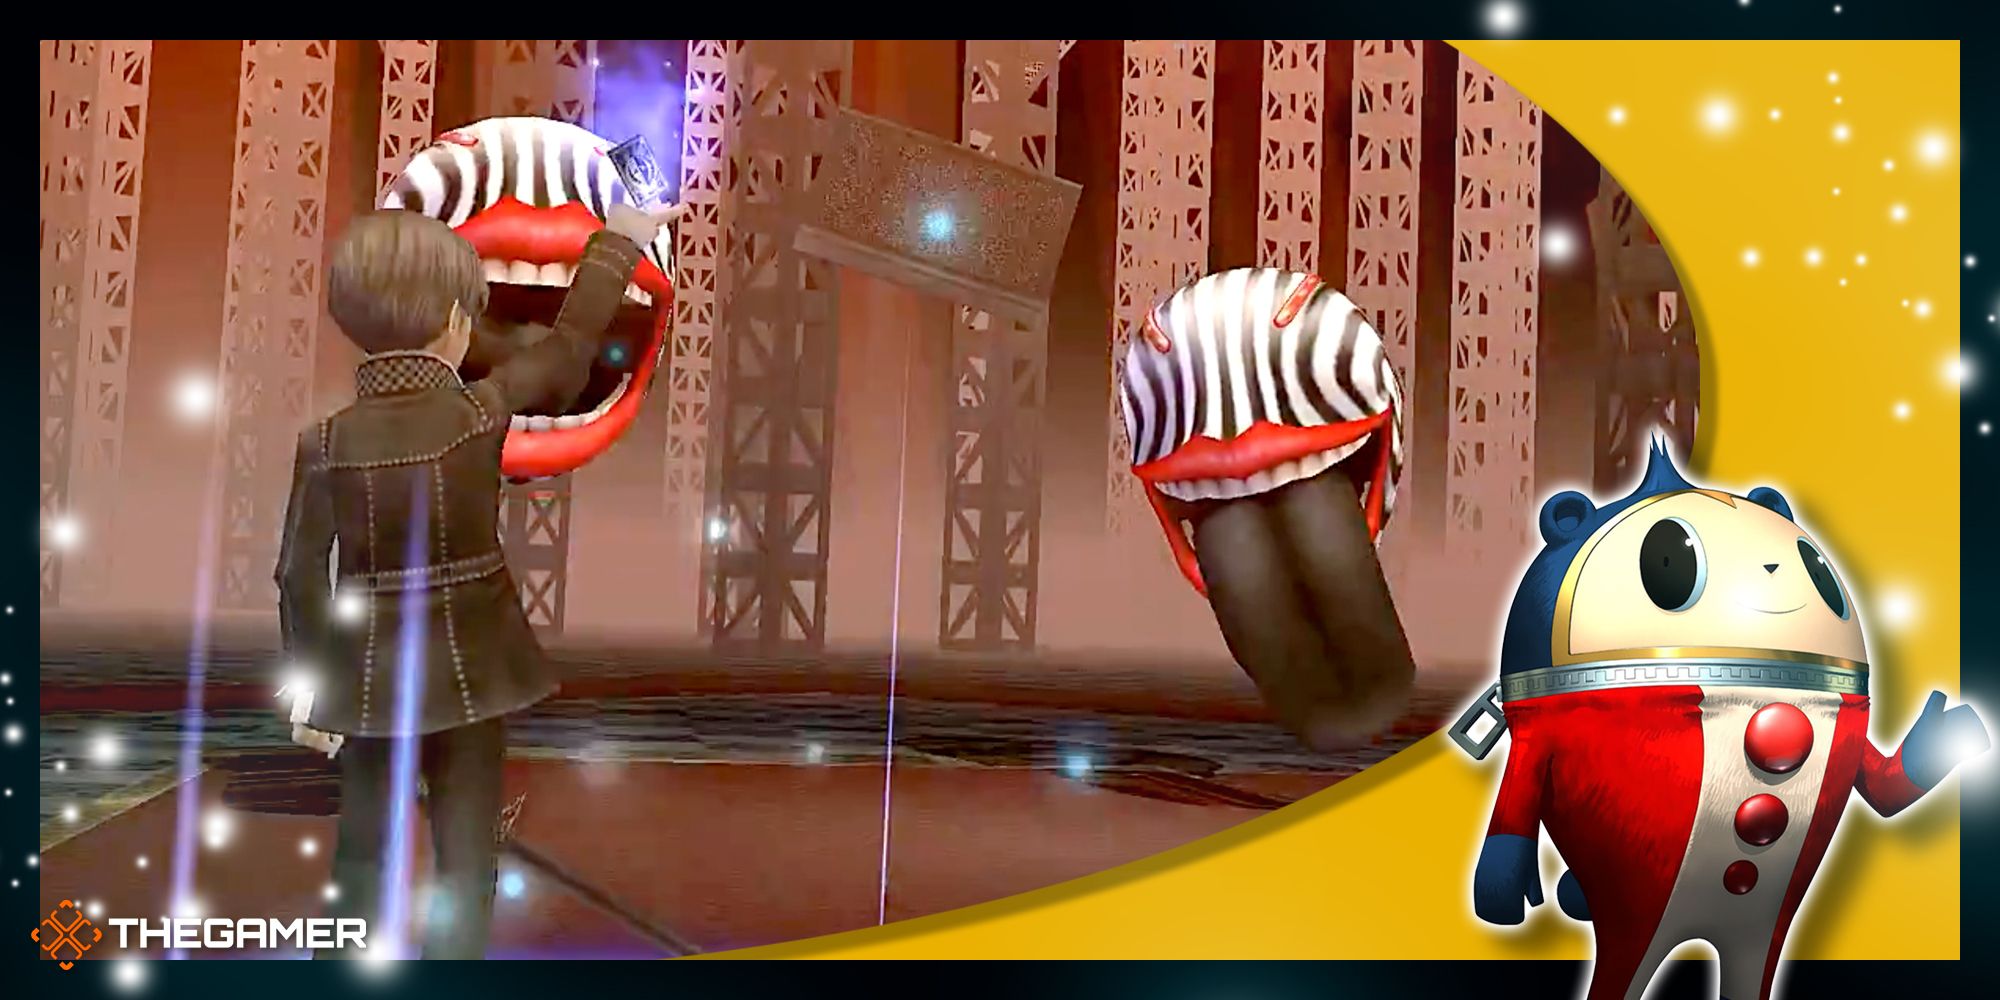 yu fighting two shadows and using an attack with our persona 4 golden frame